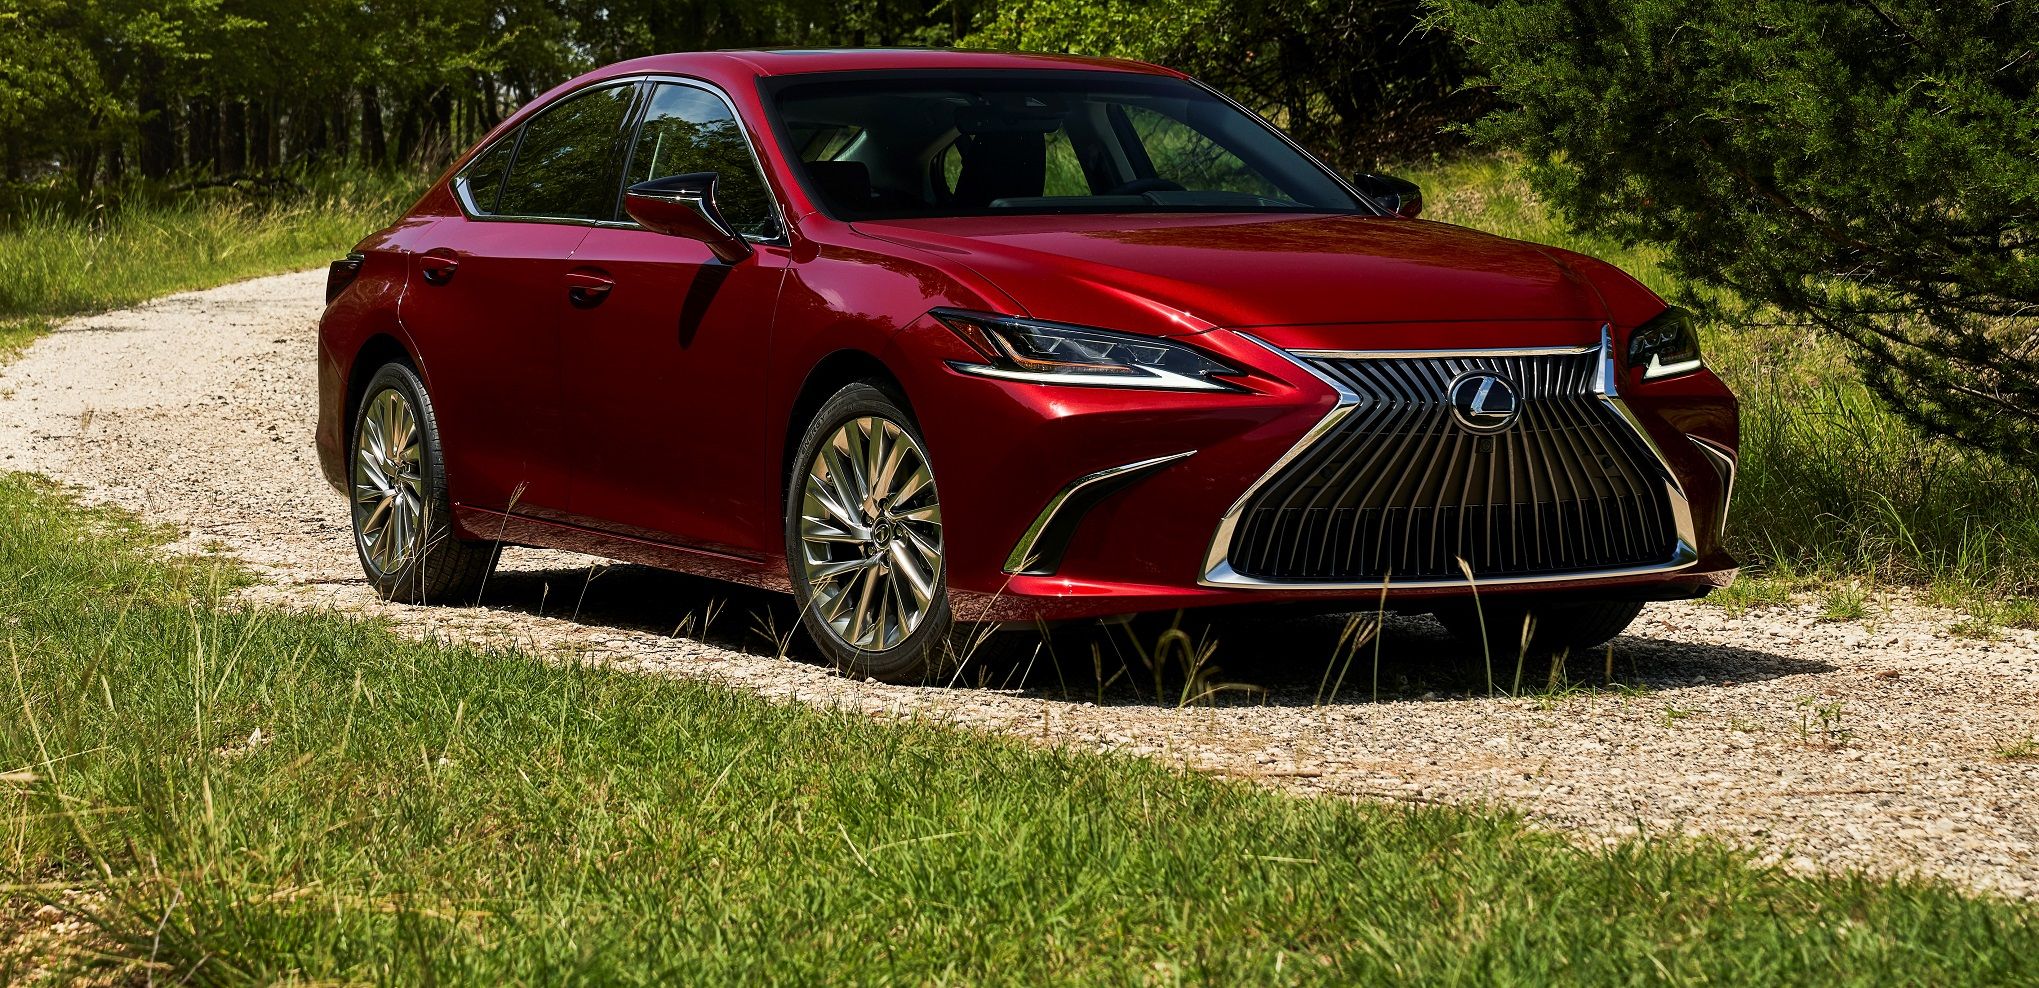 AWD Part of Upgrades for 2021 Lexus ES Lineup